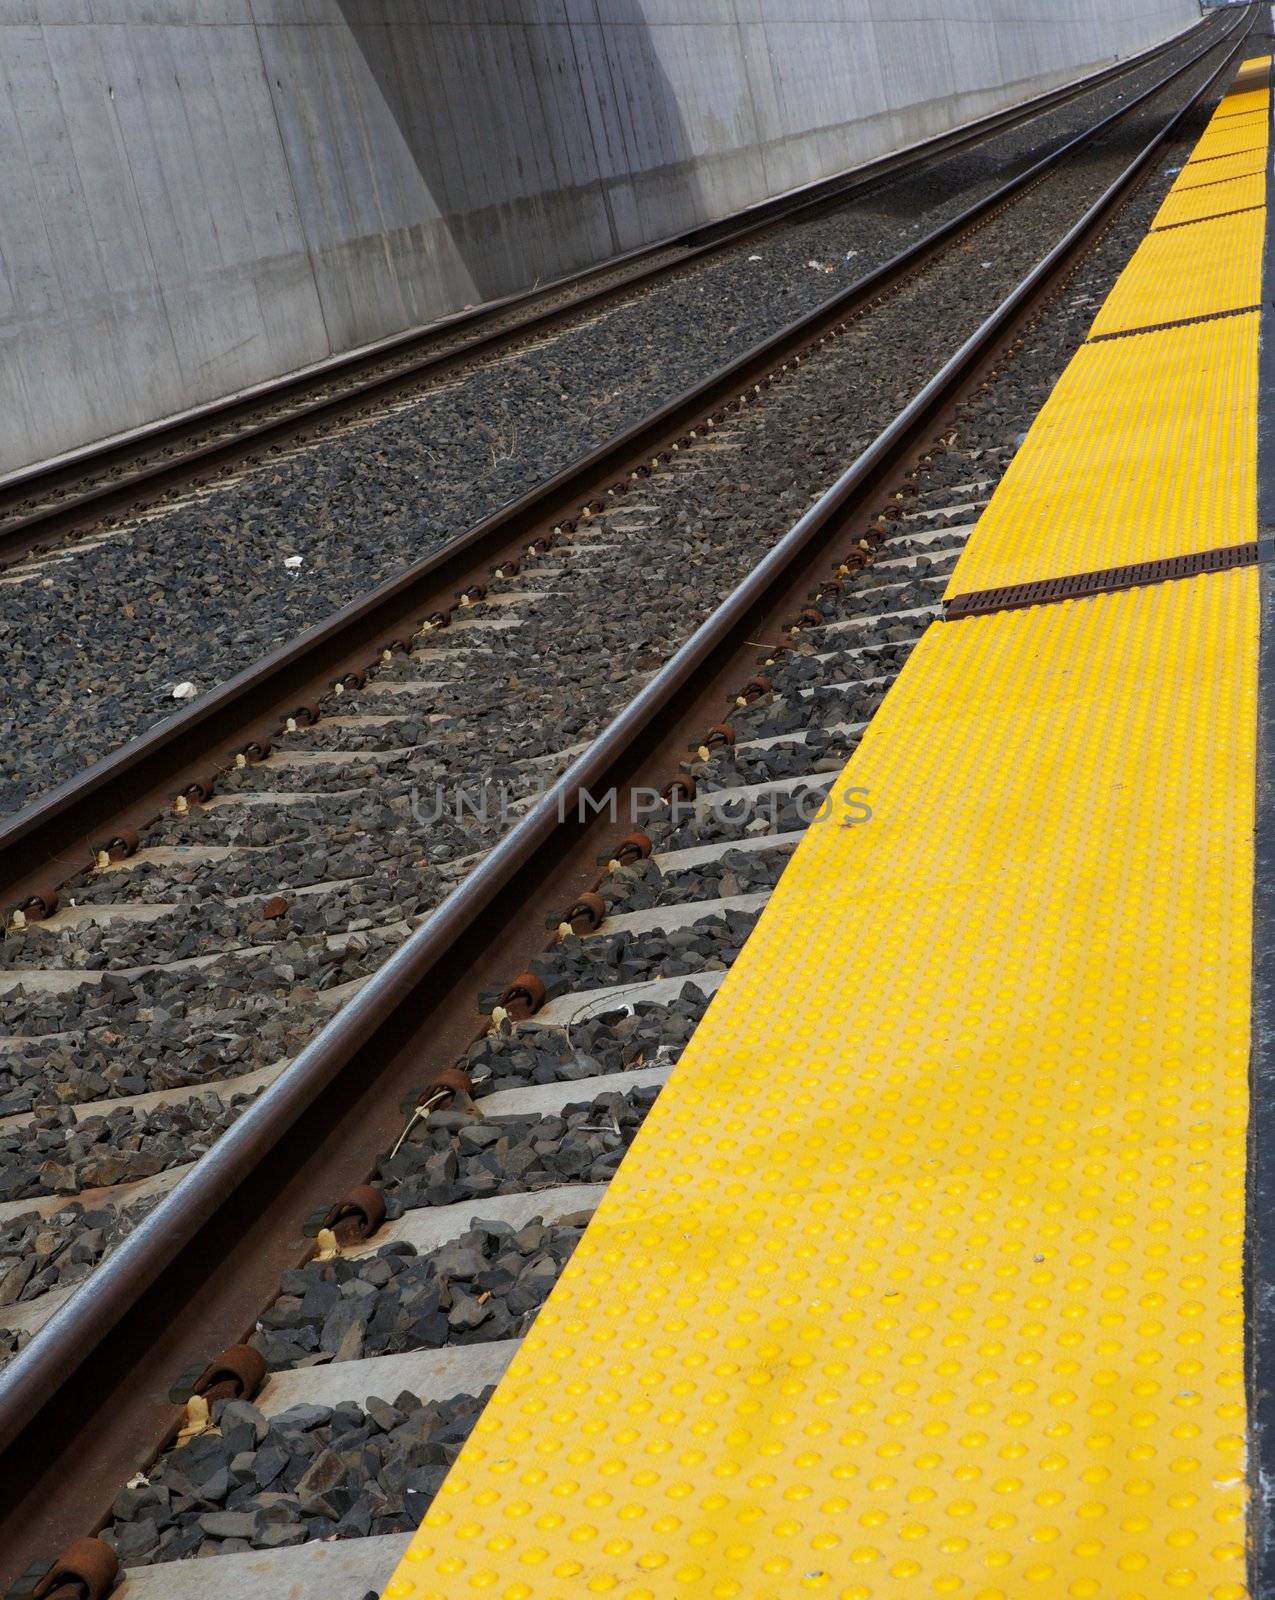 Diminishing straight train tracks at station with yellow boarding area